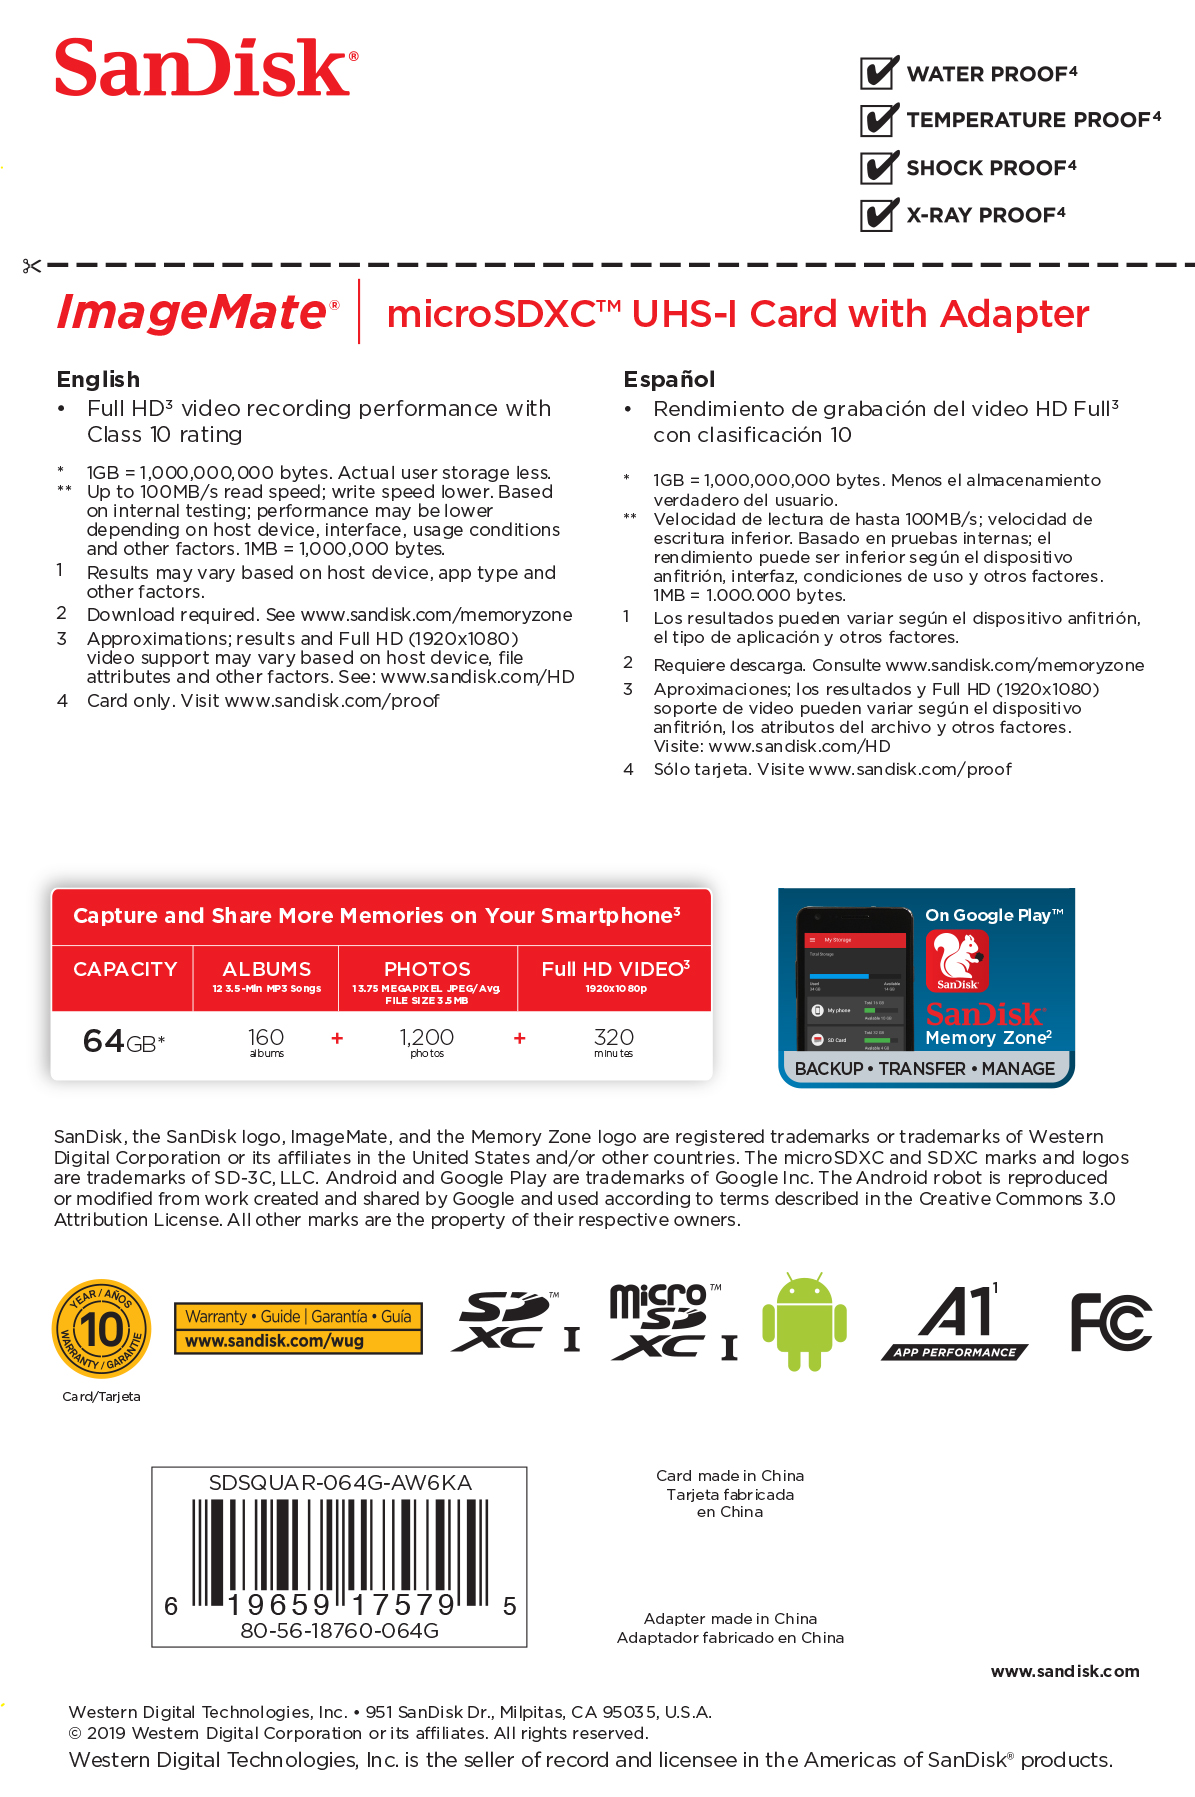 SanDisk 64GB Image Mate MicroSDXC UHS-1 Memory Card with Adapter - C10, U1, Full HD, A1 Micro SD Card - image 2 of 6